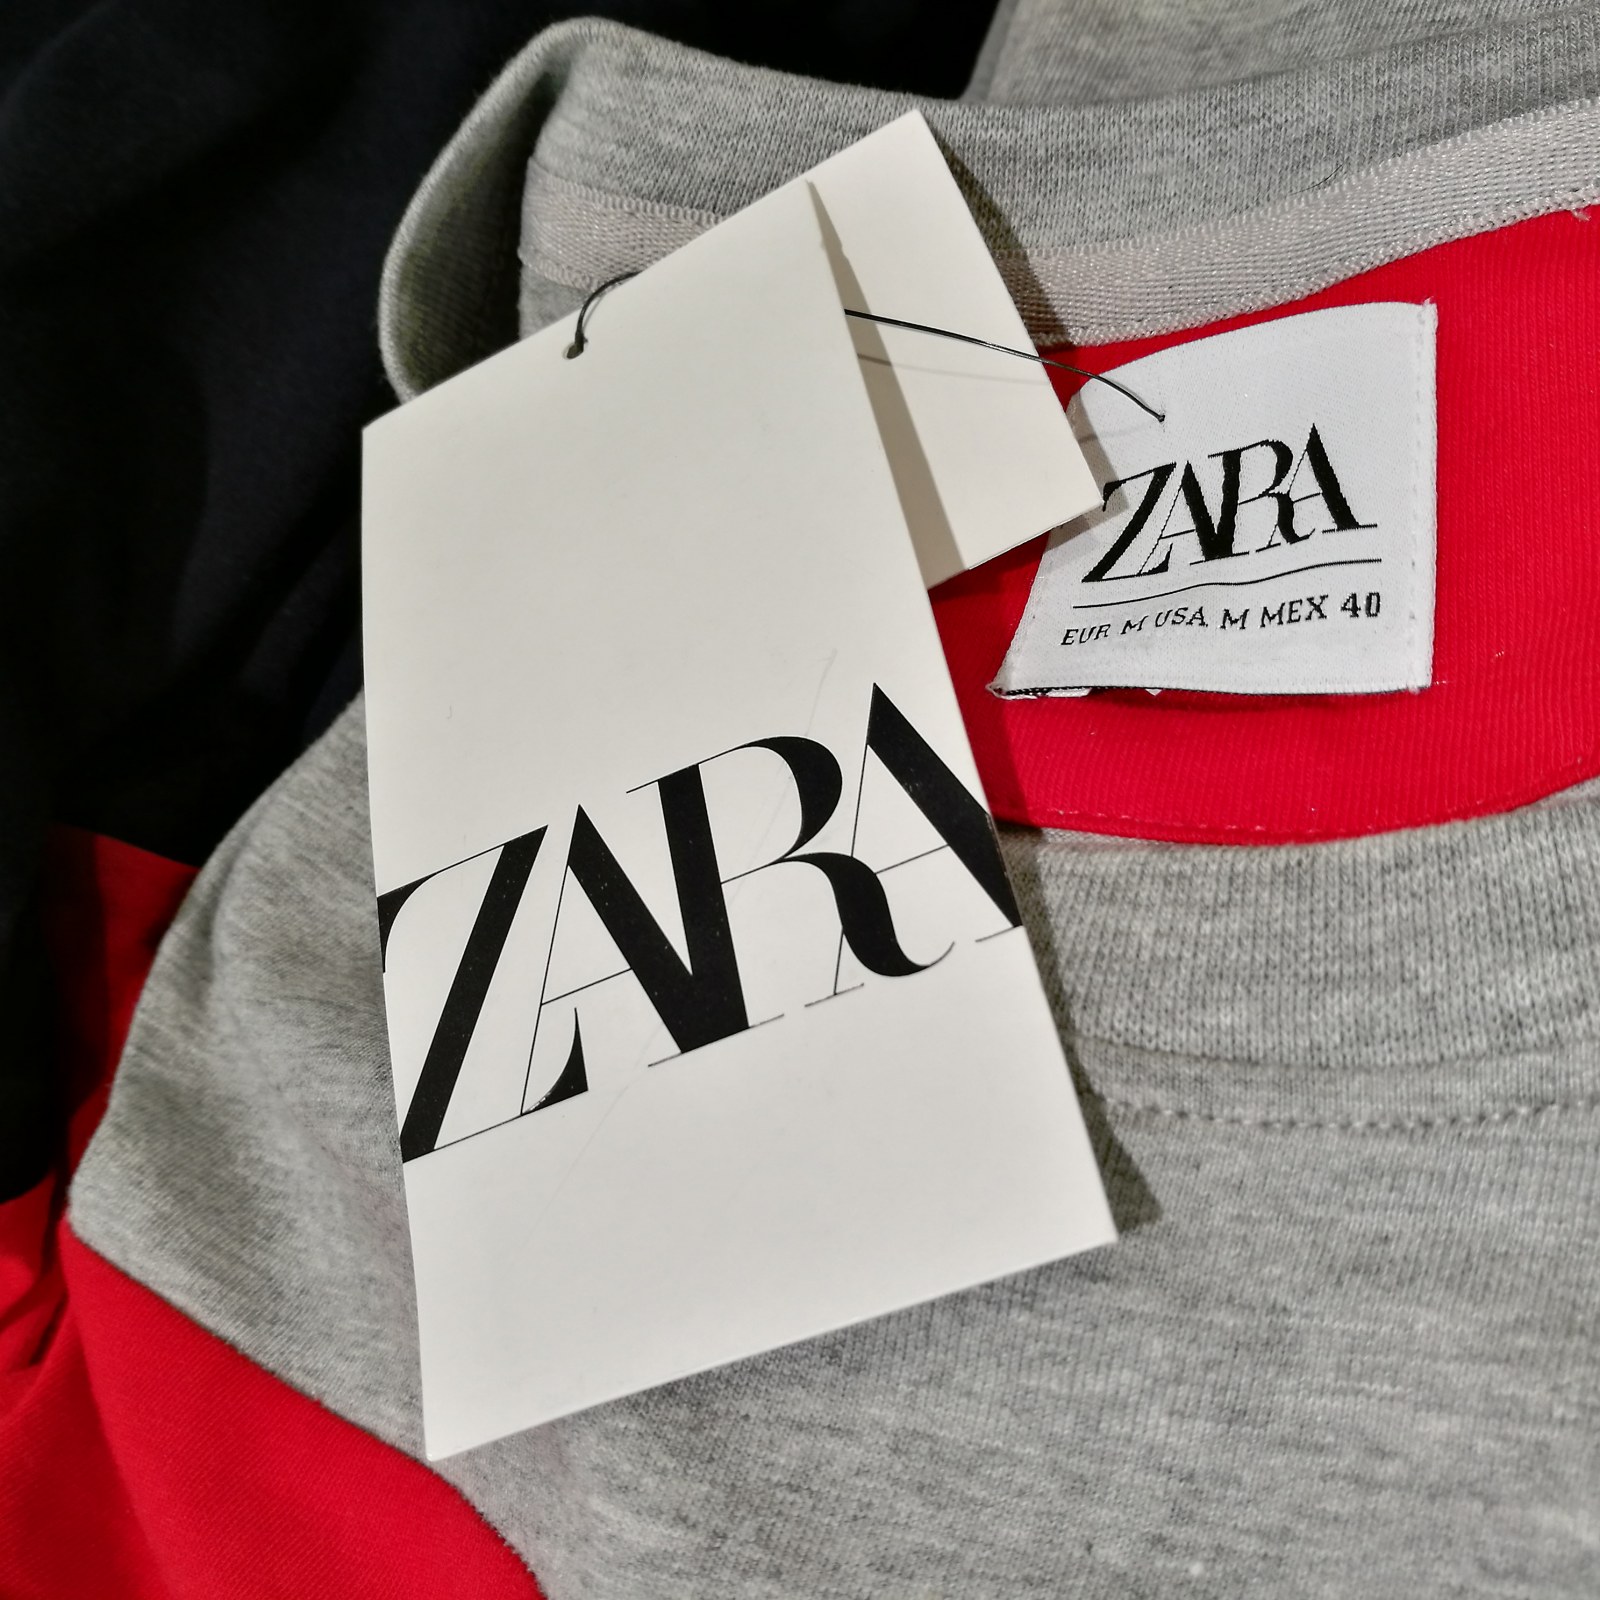 mother Forbid Unchanged Shopper Finds Bizarre 'Code' of Symbols on Zara Clothing Labels